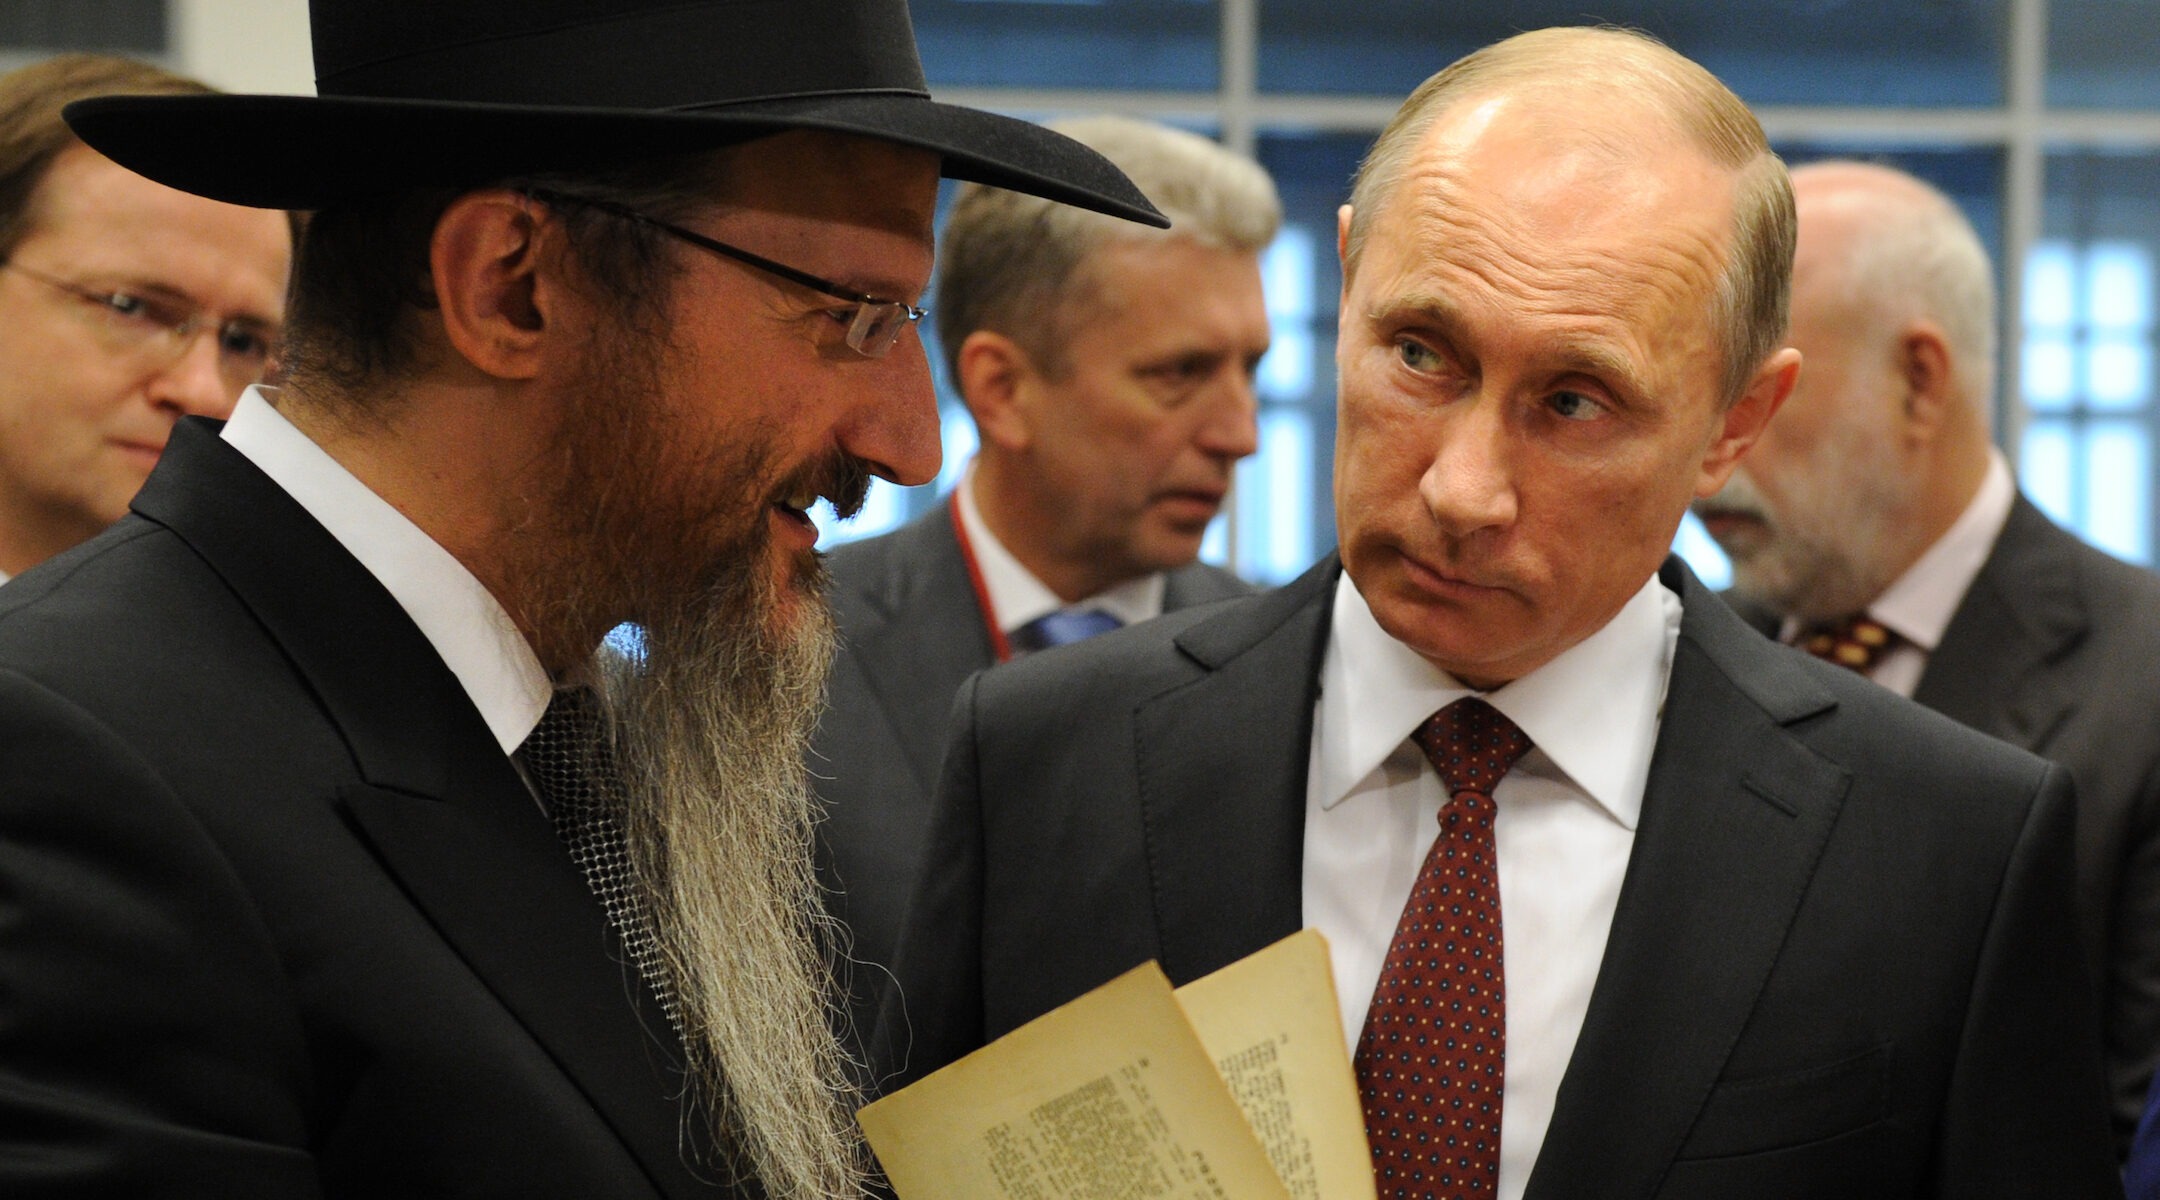 Russia's President Vladimir Putin, right, and Russia's Chief Rabbi Berel Lazar attend a ceremony marking the handover of items in the Schneerson library to a Chabad-run museum in Moscow, June 13, 2013. (Photo/JTA-Yuri Kadobnov-AFP via Getty Images)